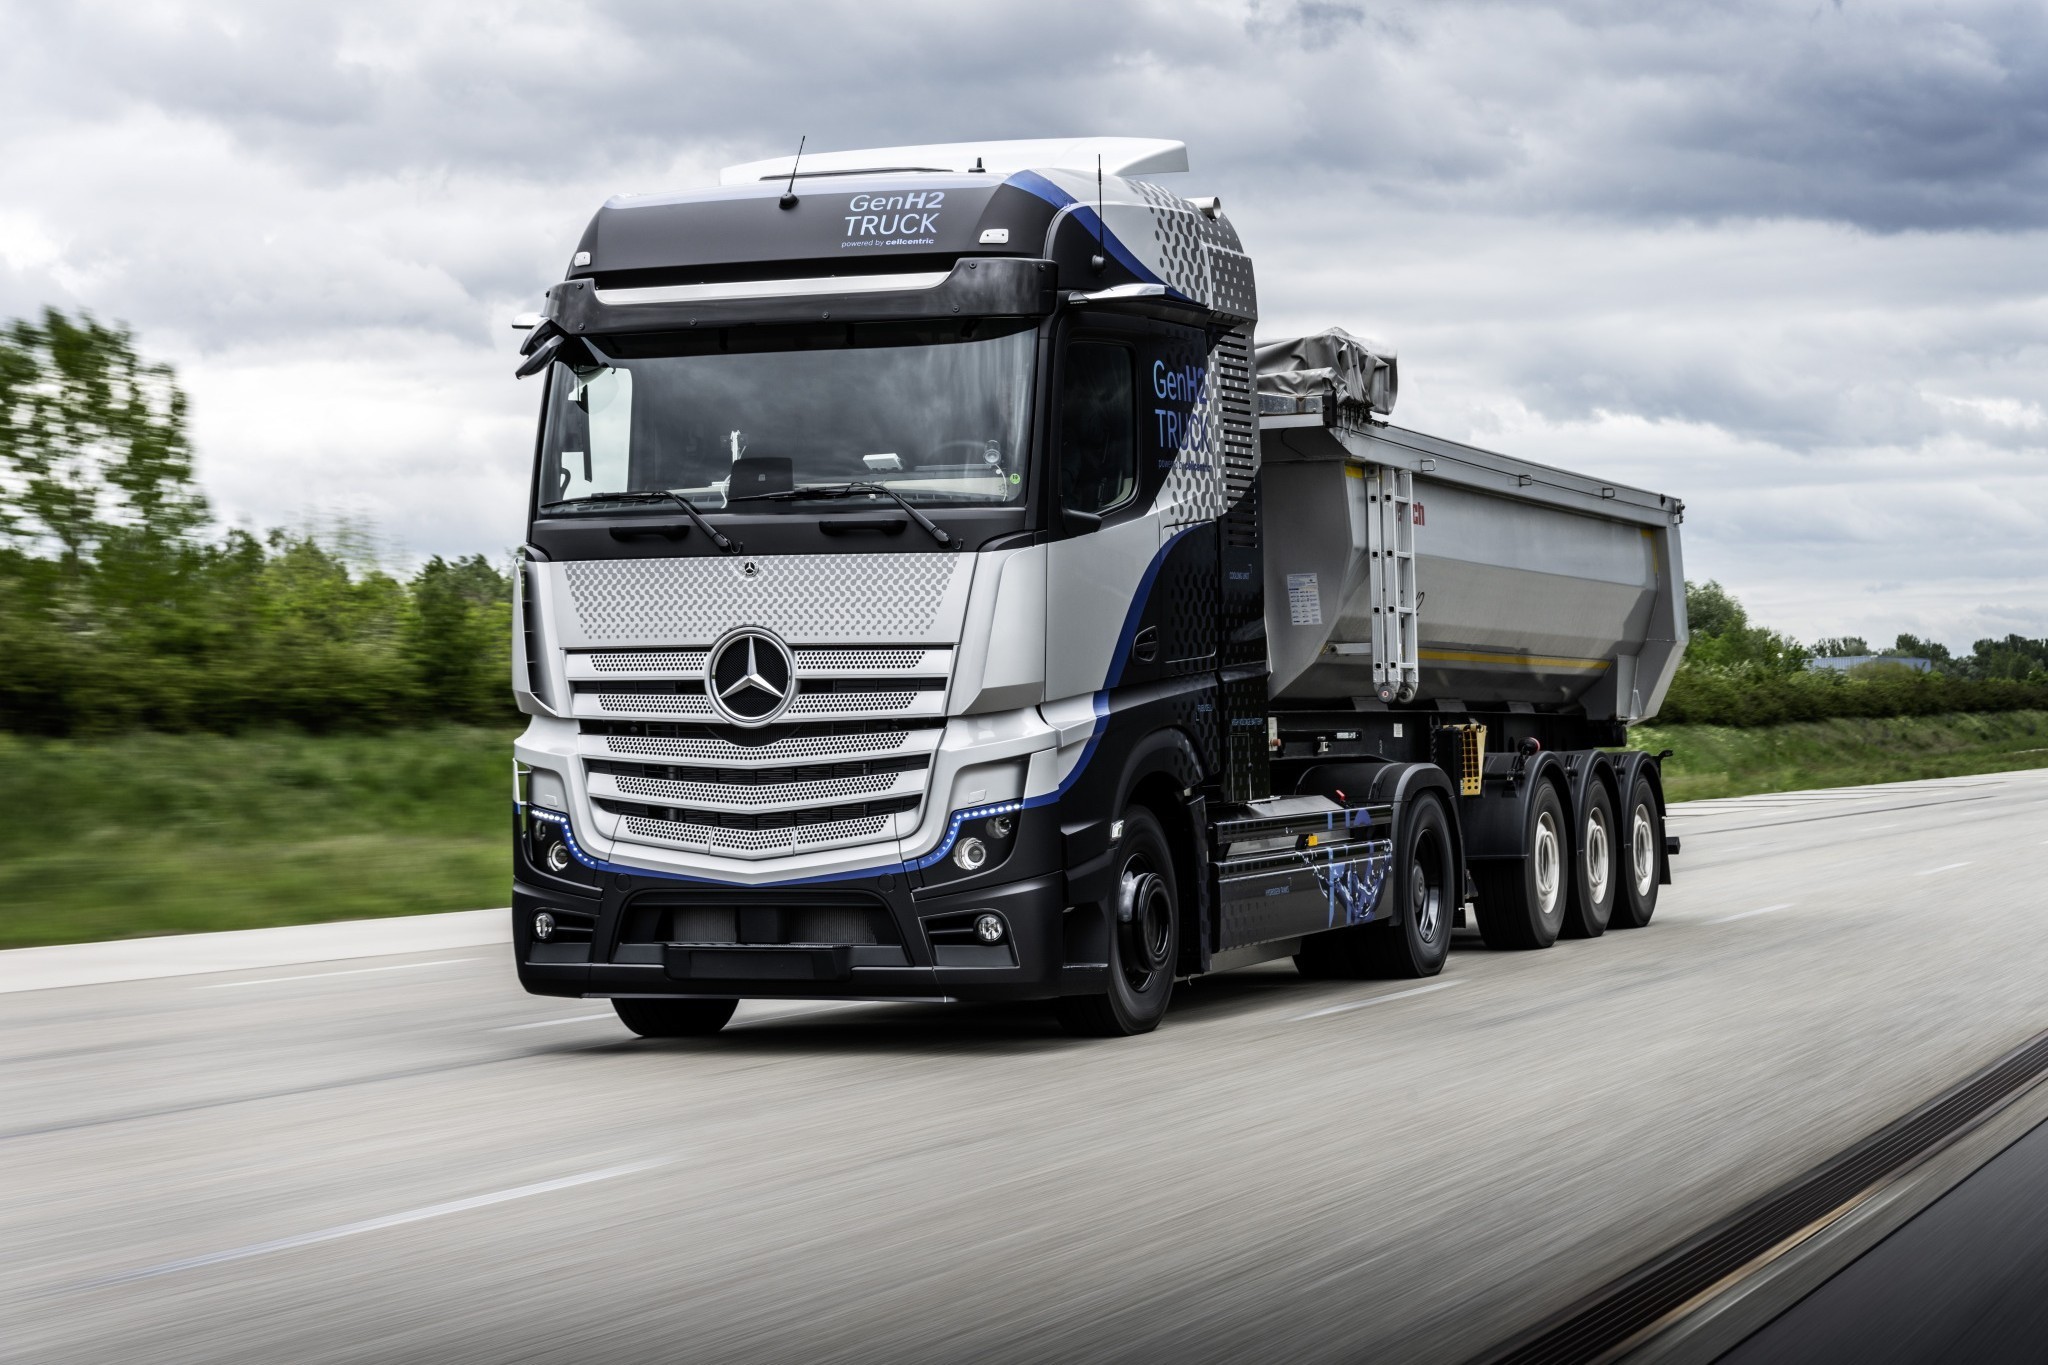 Fuel Cell Mercedes Benz Genh2 Truck Passes Challenging Tests With